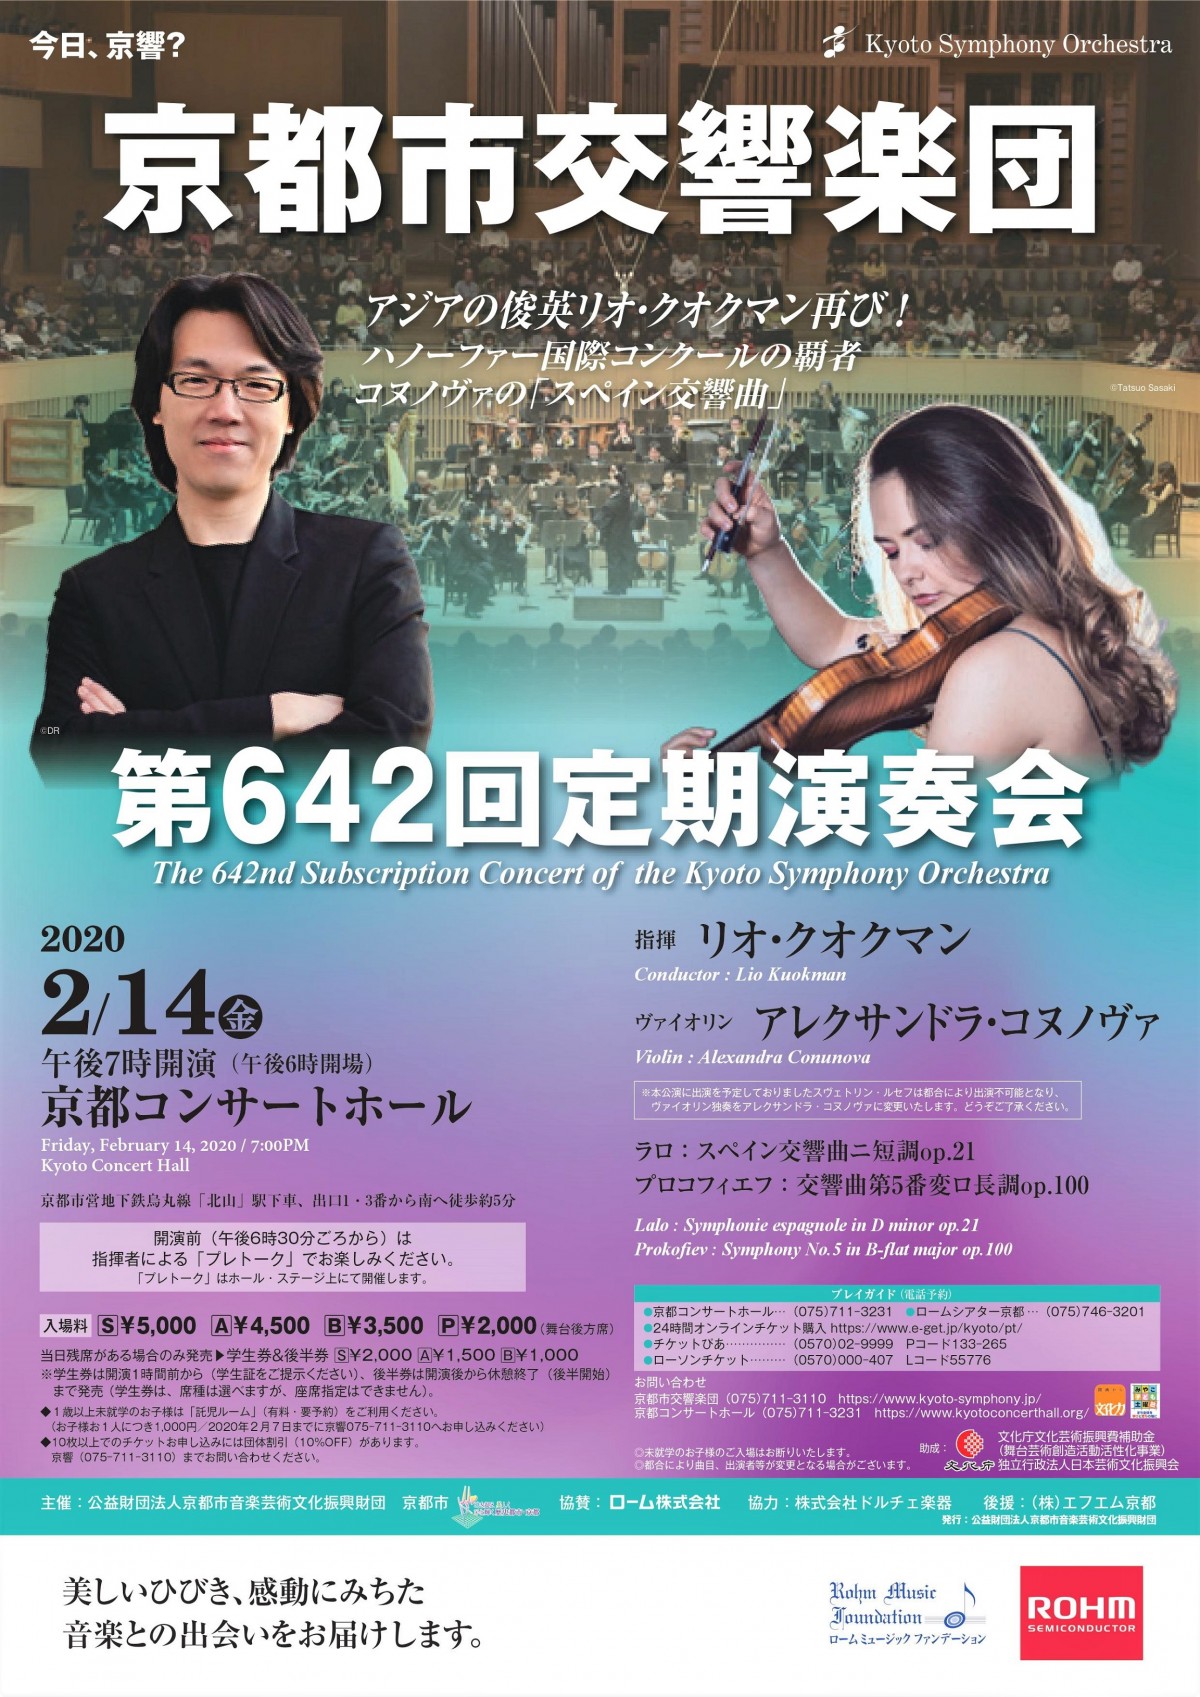 <Soloist Changed!>
The 642nd Subscription Concert